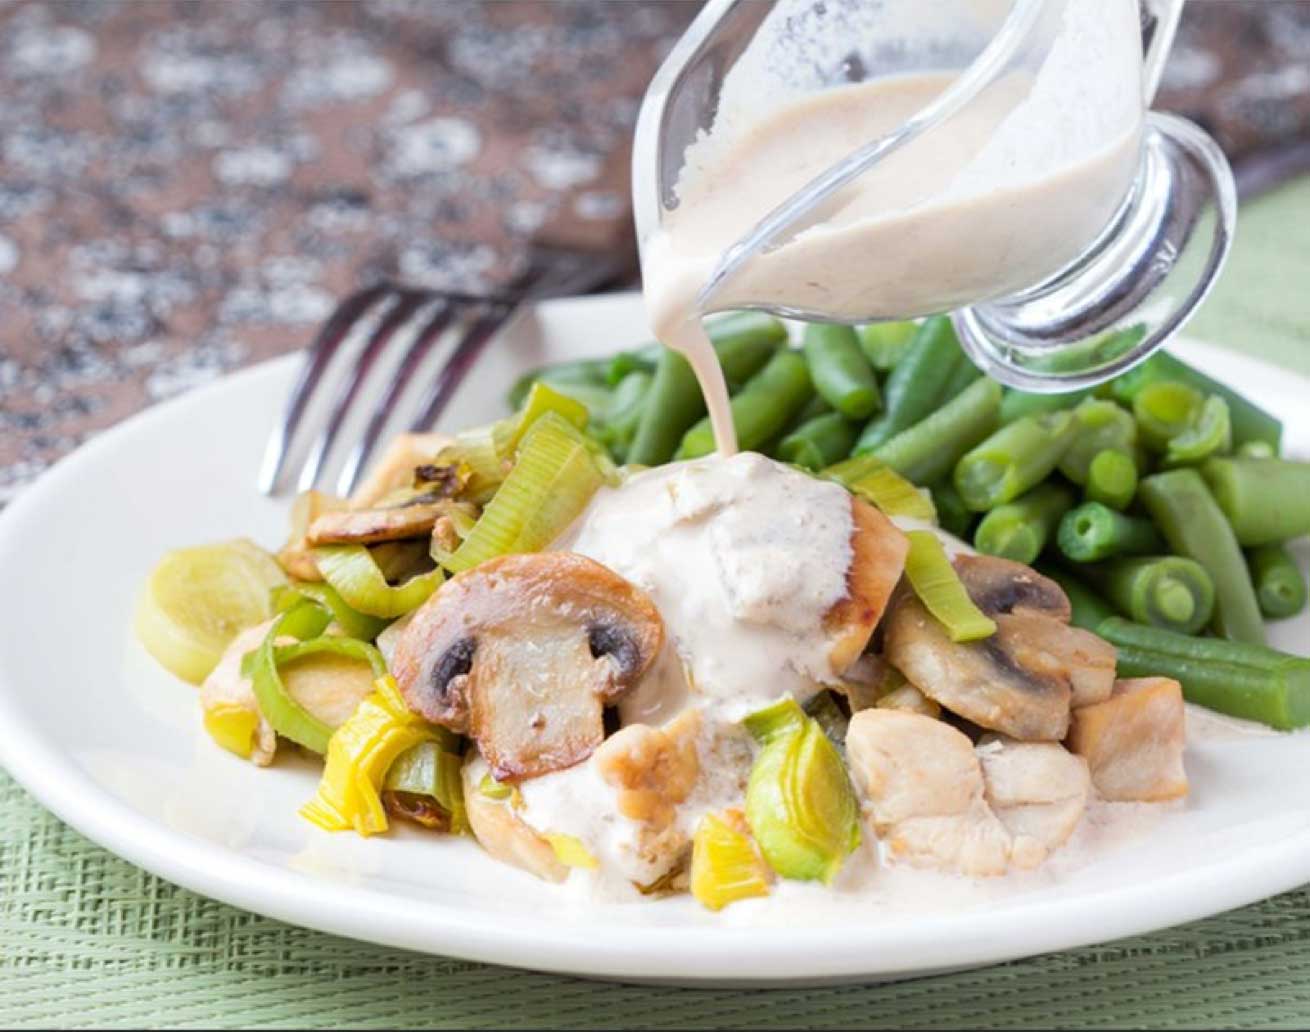 Chicken Pot Pie in your Instant Pot? Well …. sort of! Whole30 Deconstructed Chicken & Mushroom Pie in the Instant Pot by Samantha at Recipe This is just one of the creative recipes on our list of top Chicken Instant Pot ideas!